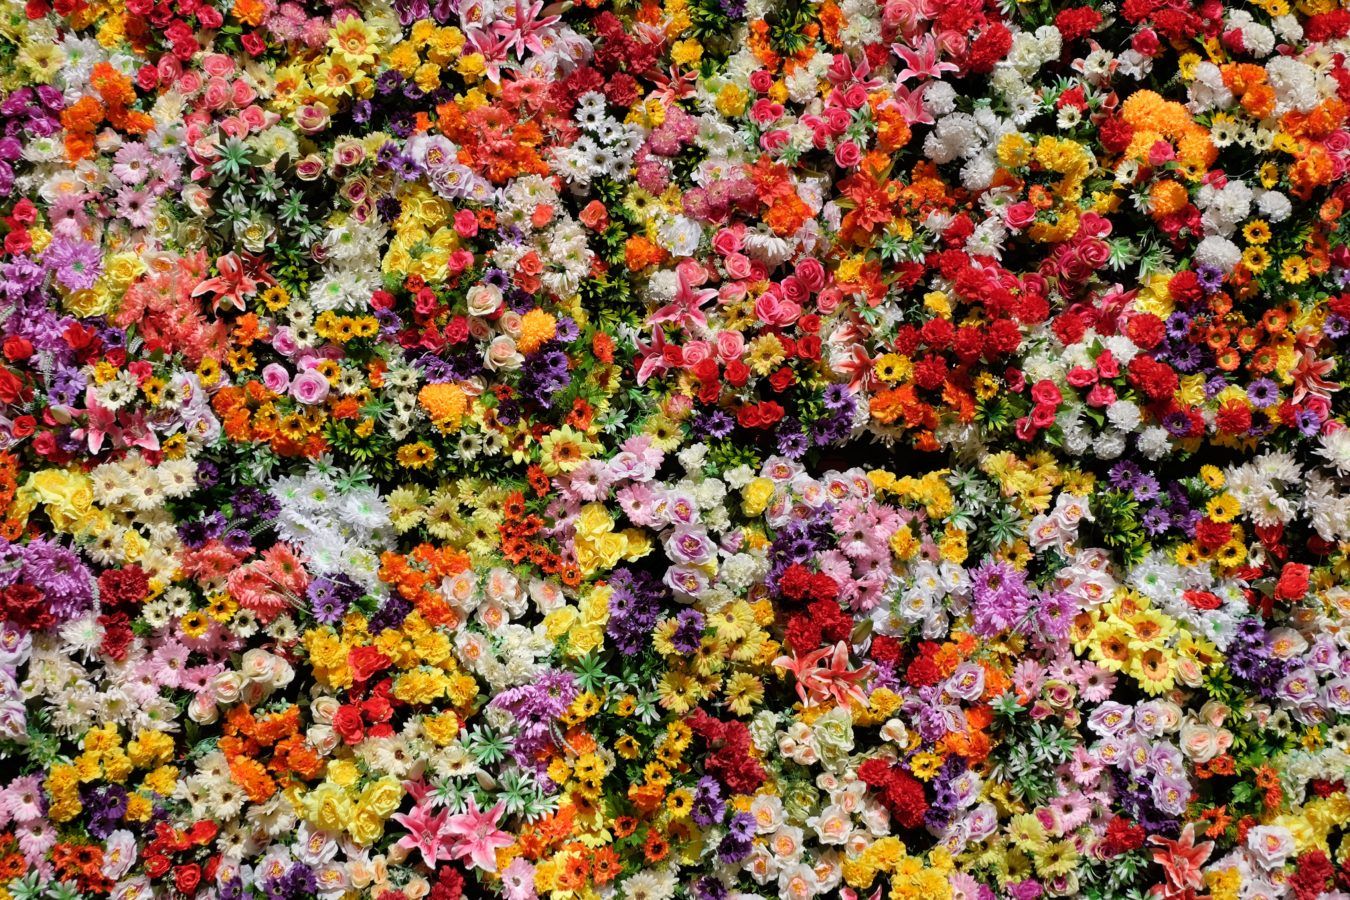 50 beautiful flowers in the world that will inspire your inner green thumb